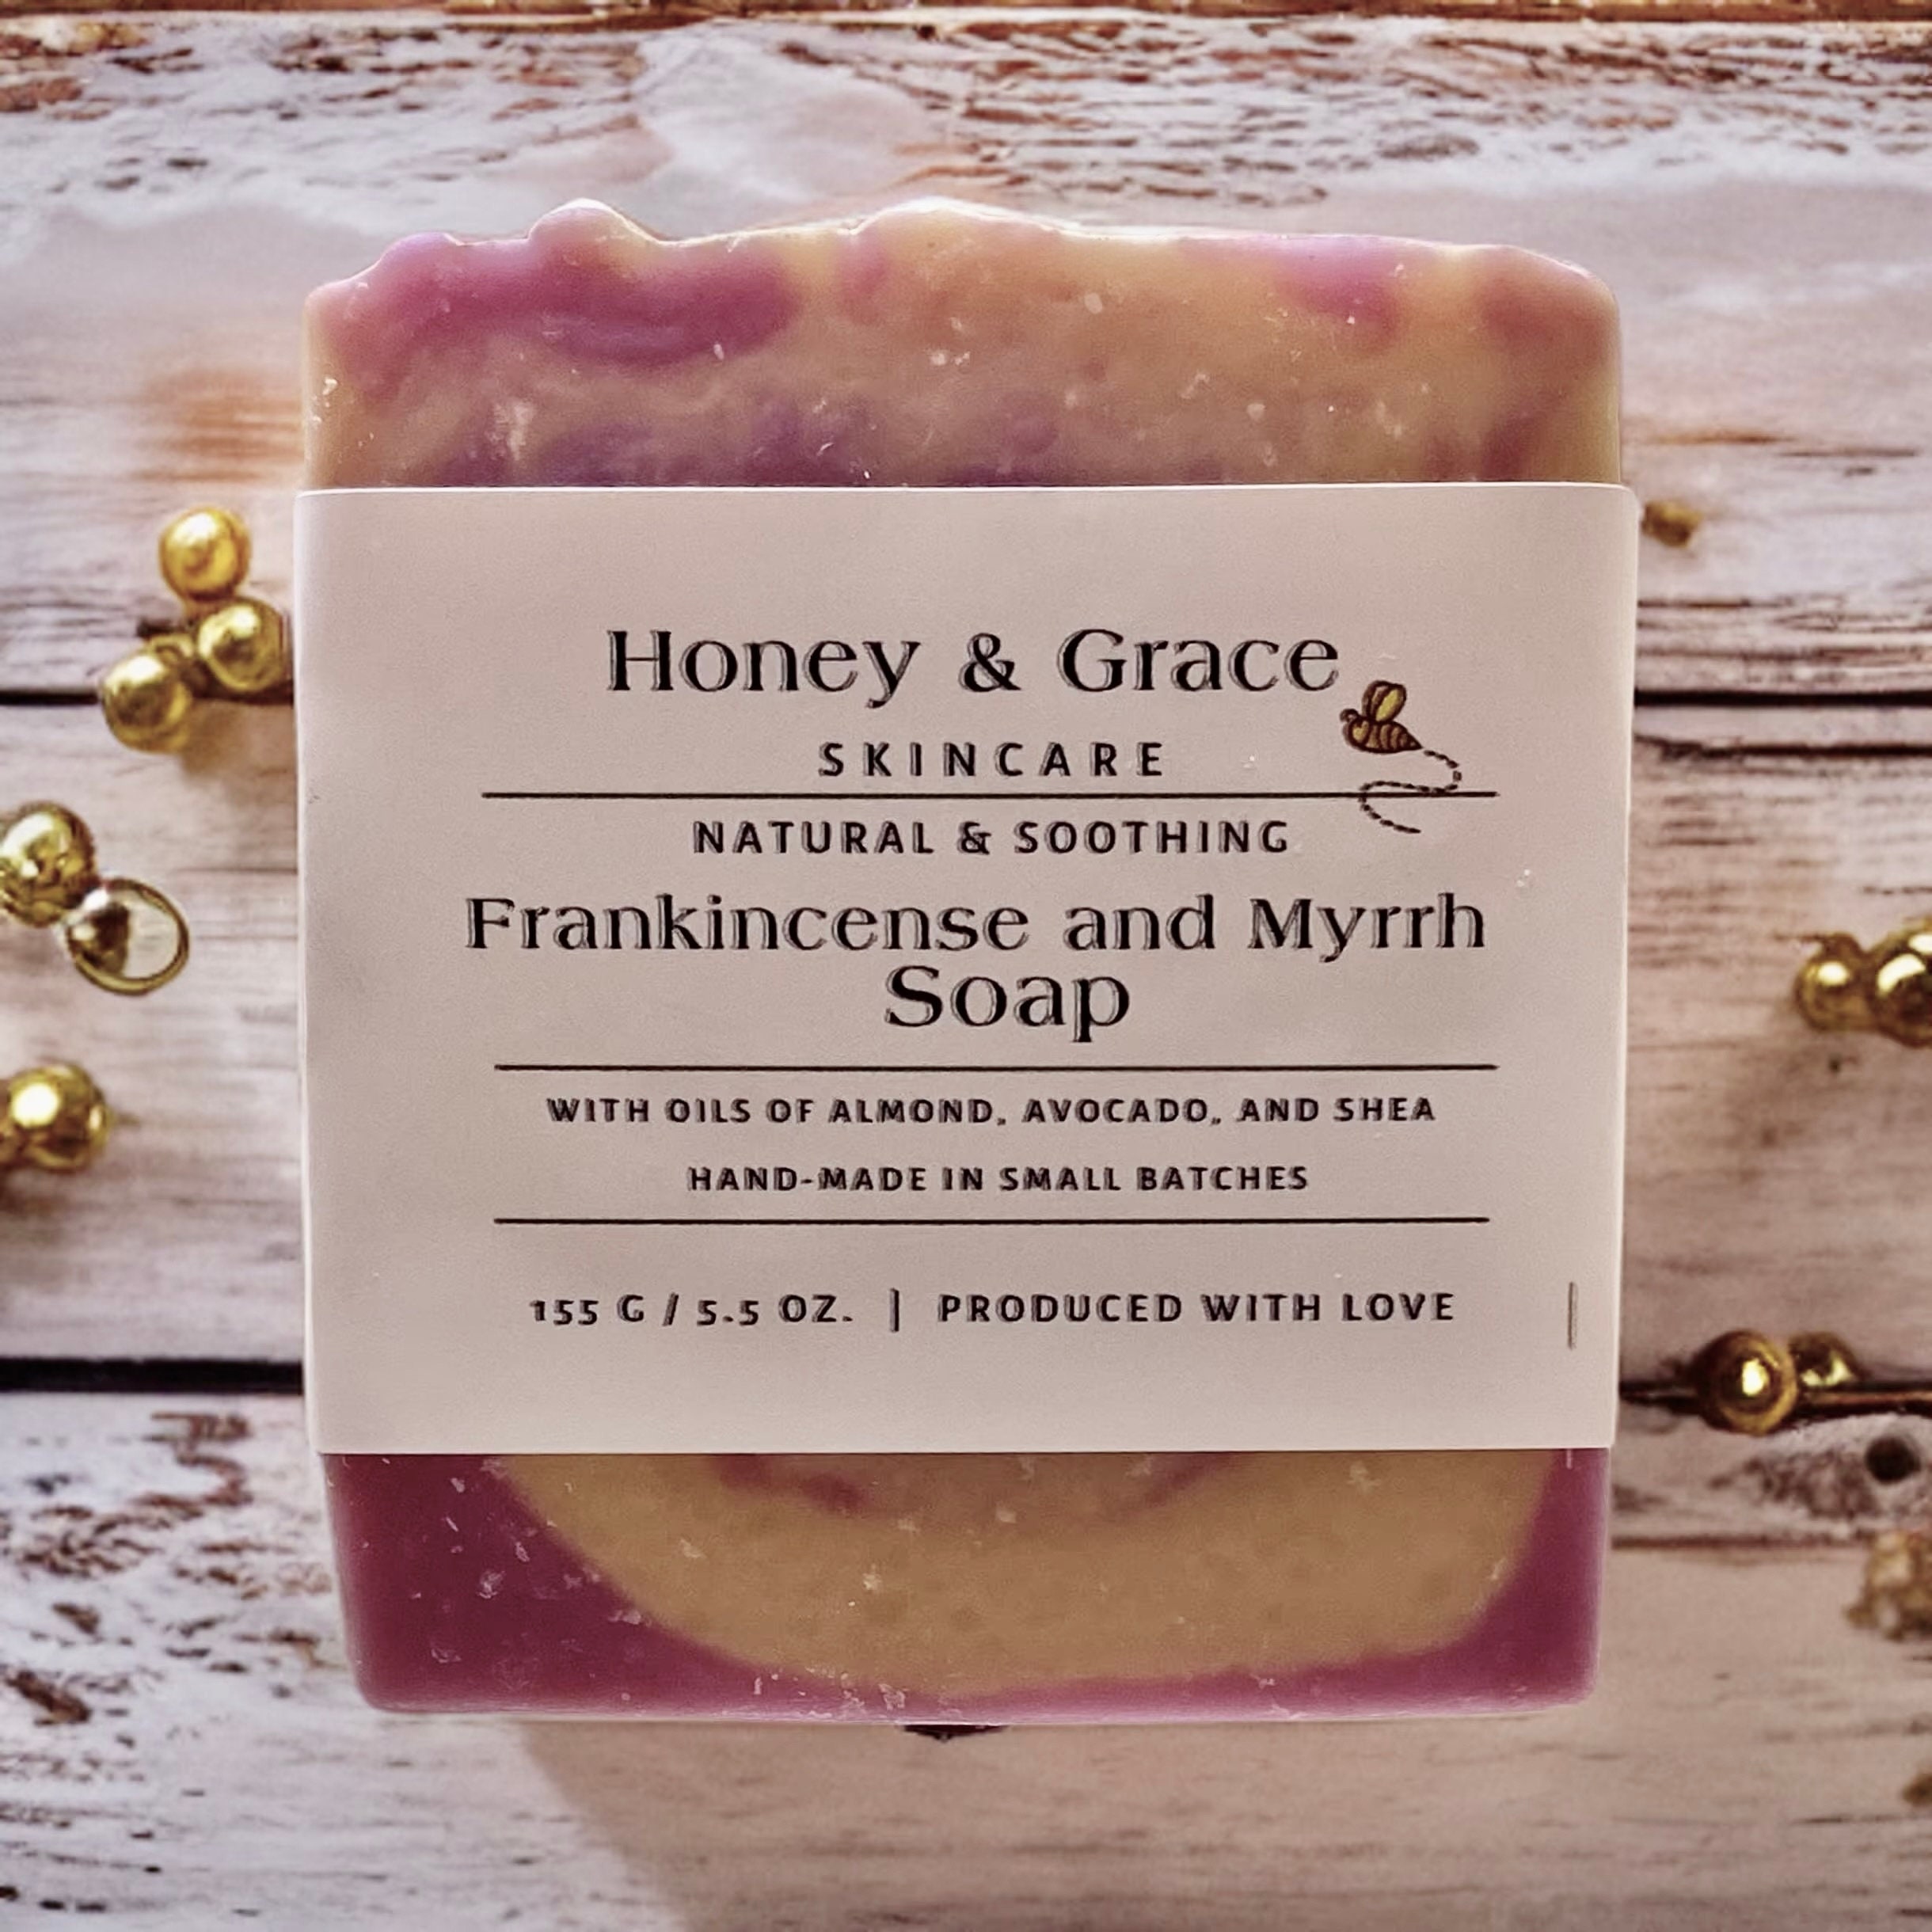 Frankincense and Myrrh Handmade Soap with Madder Root – Normal Soap Company